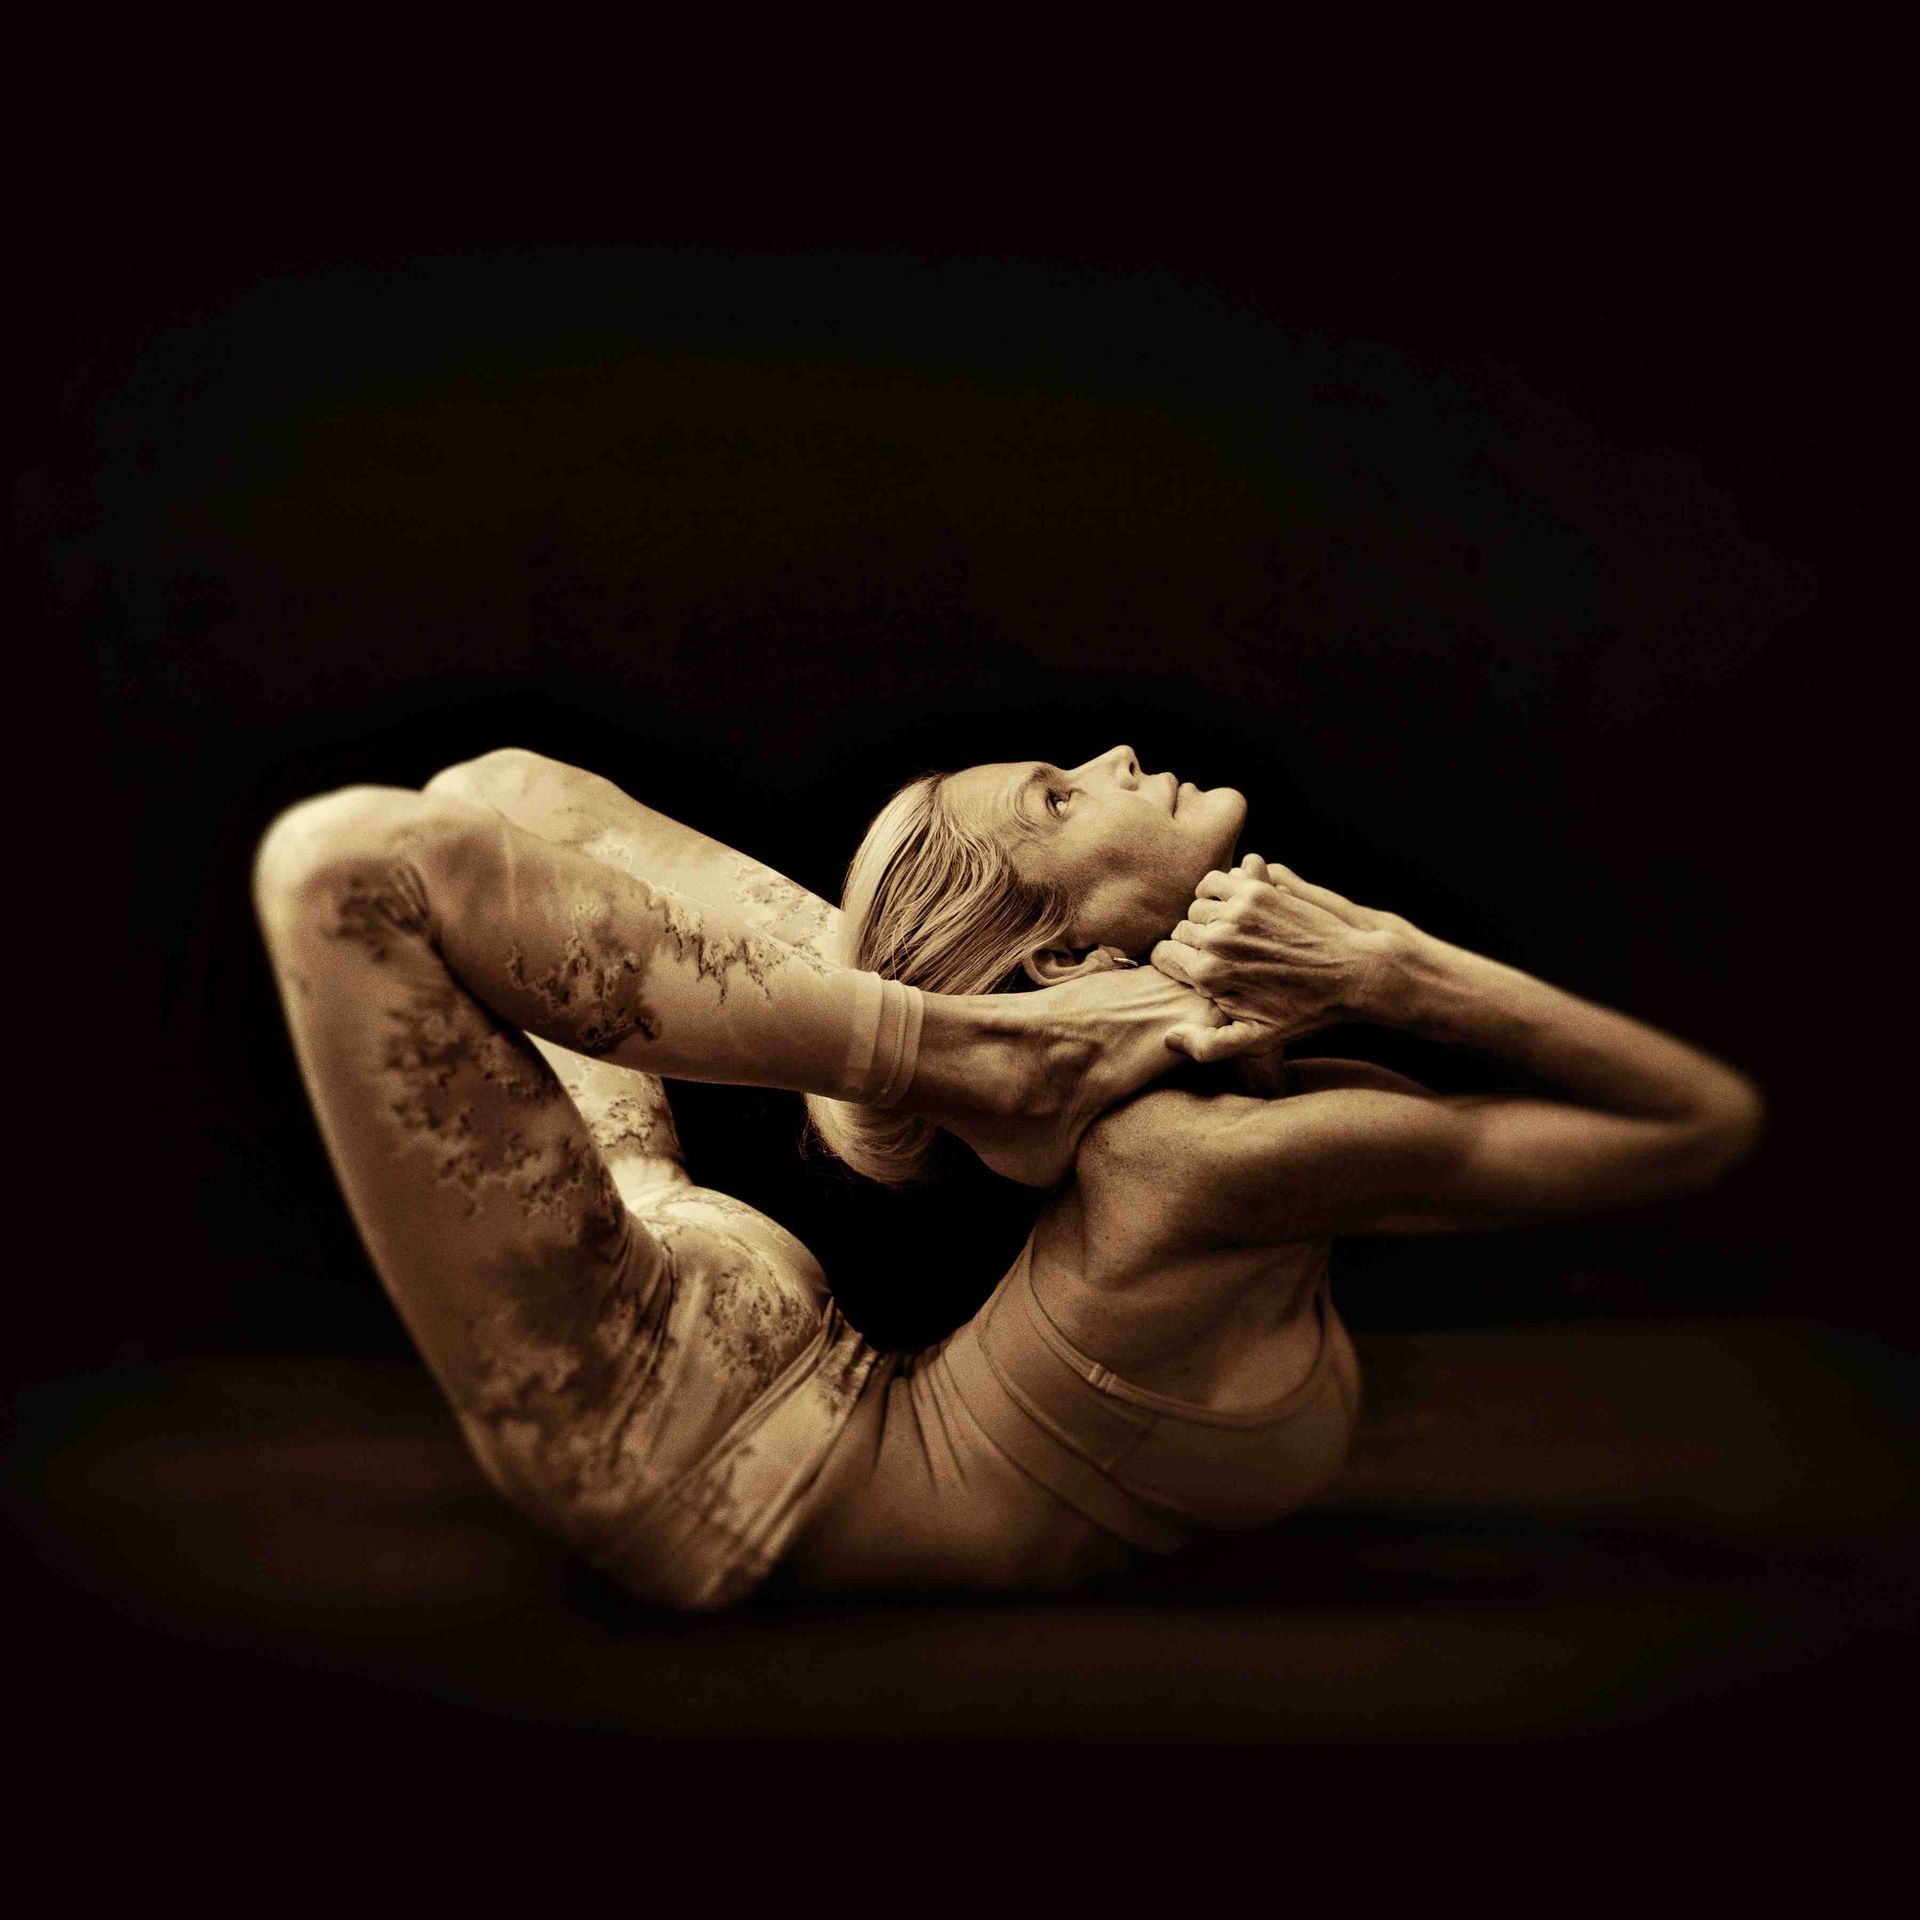 A contortionist in magical photo taken by our photographer in our Amarillo studio